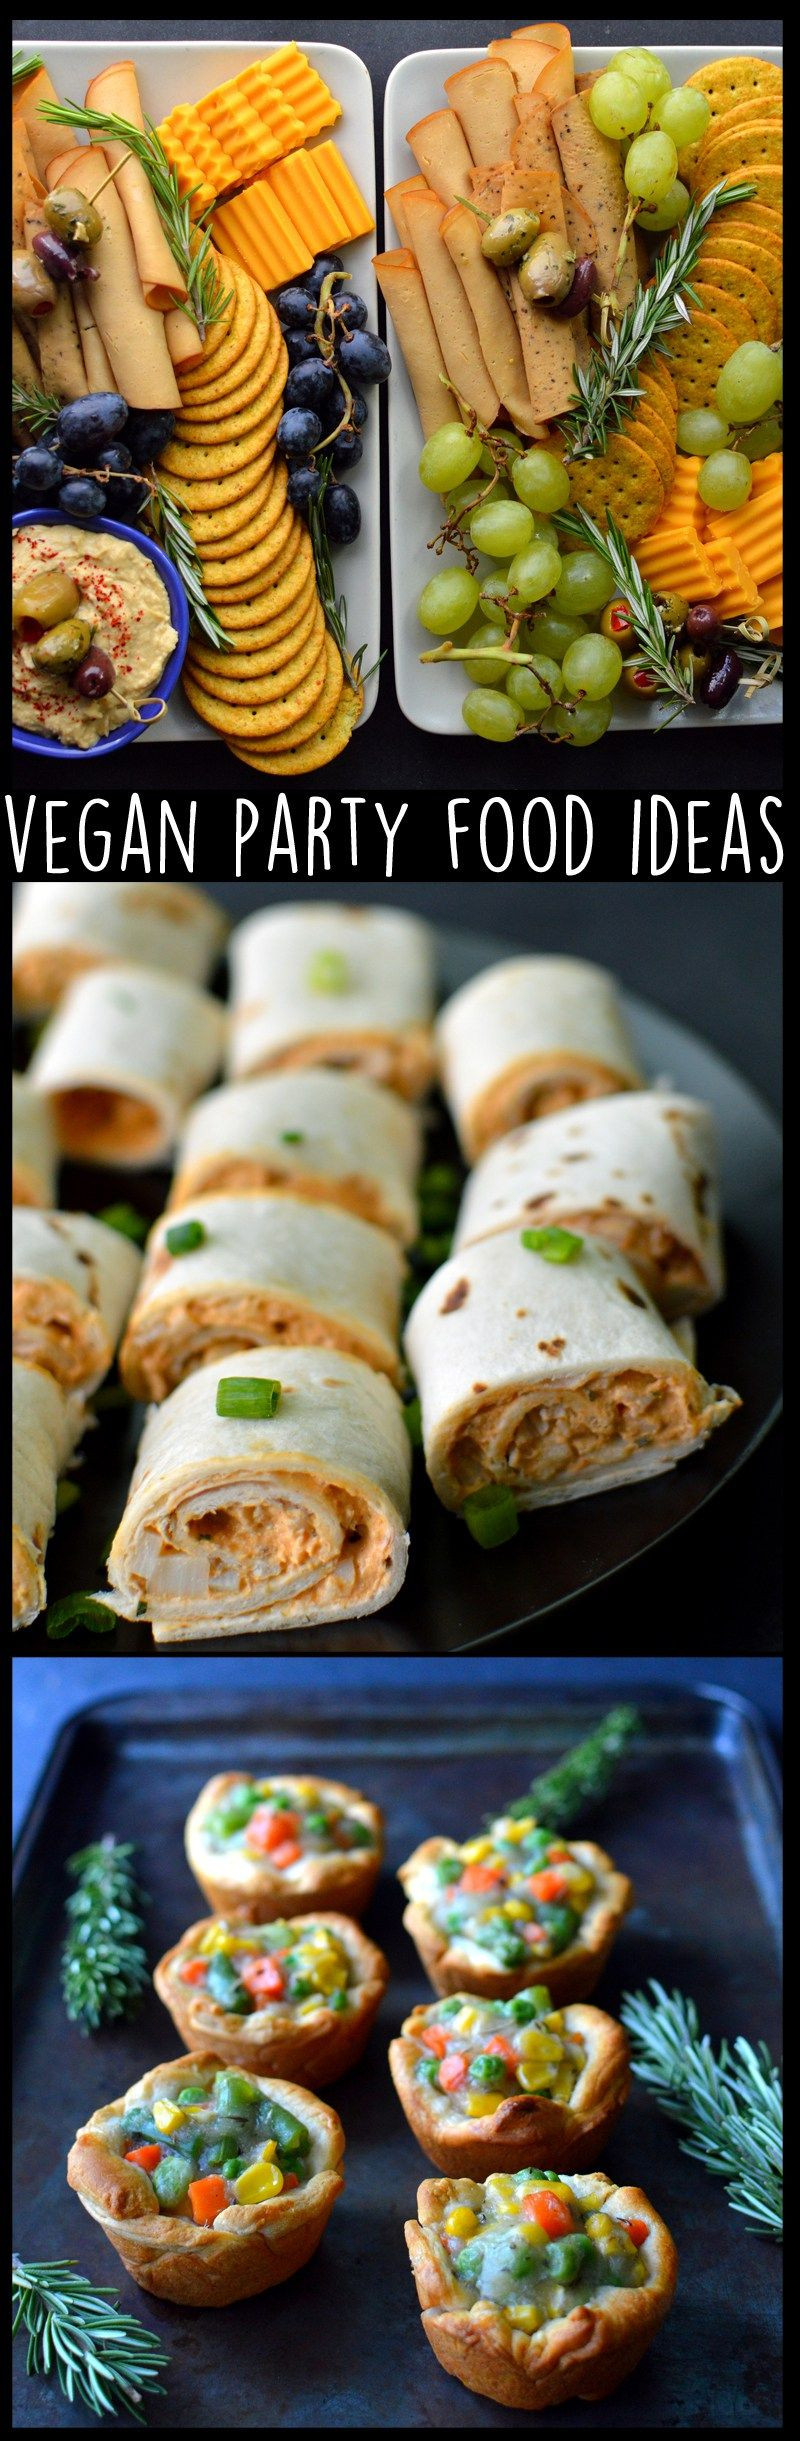 Vegetarian Appetizers Finger Food
 Vegan Party Food Ideas for Holidays Potlucks Appetizers